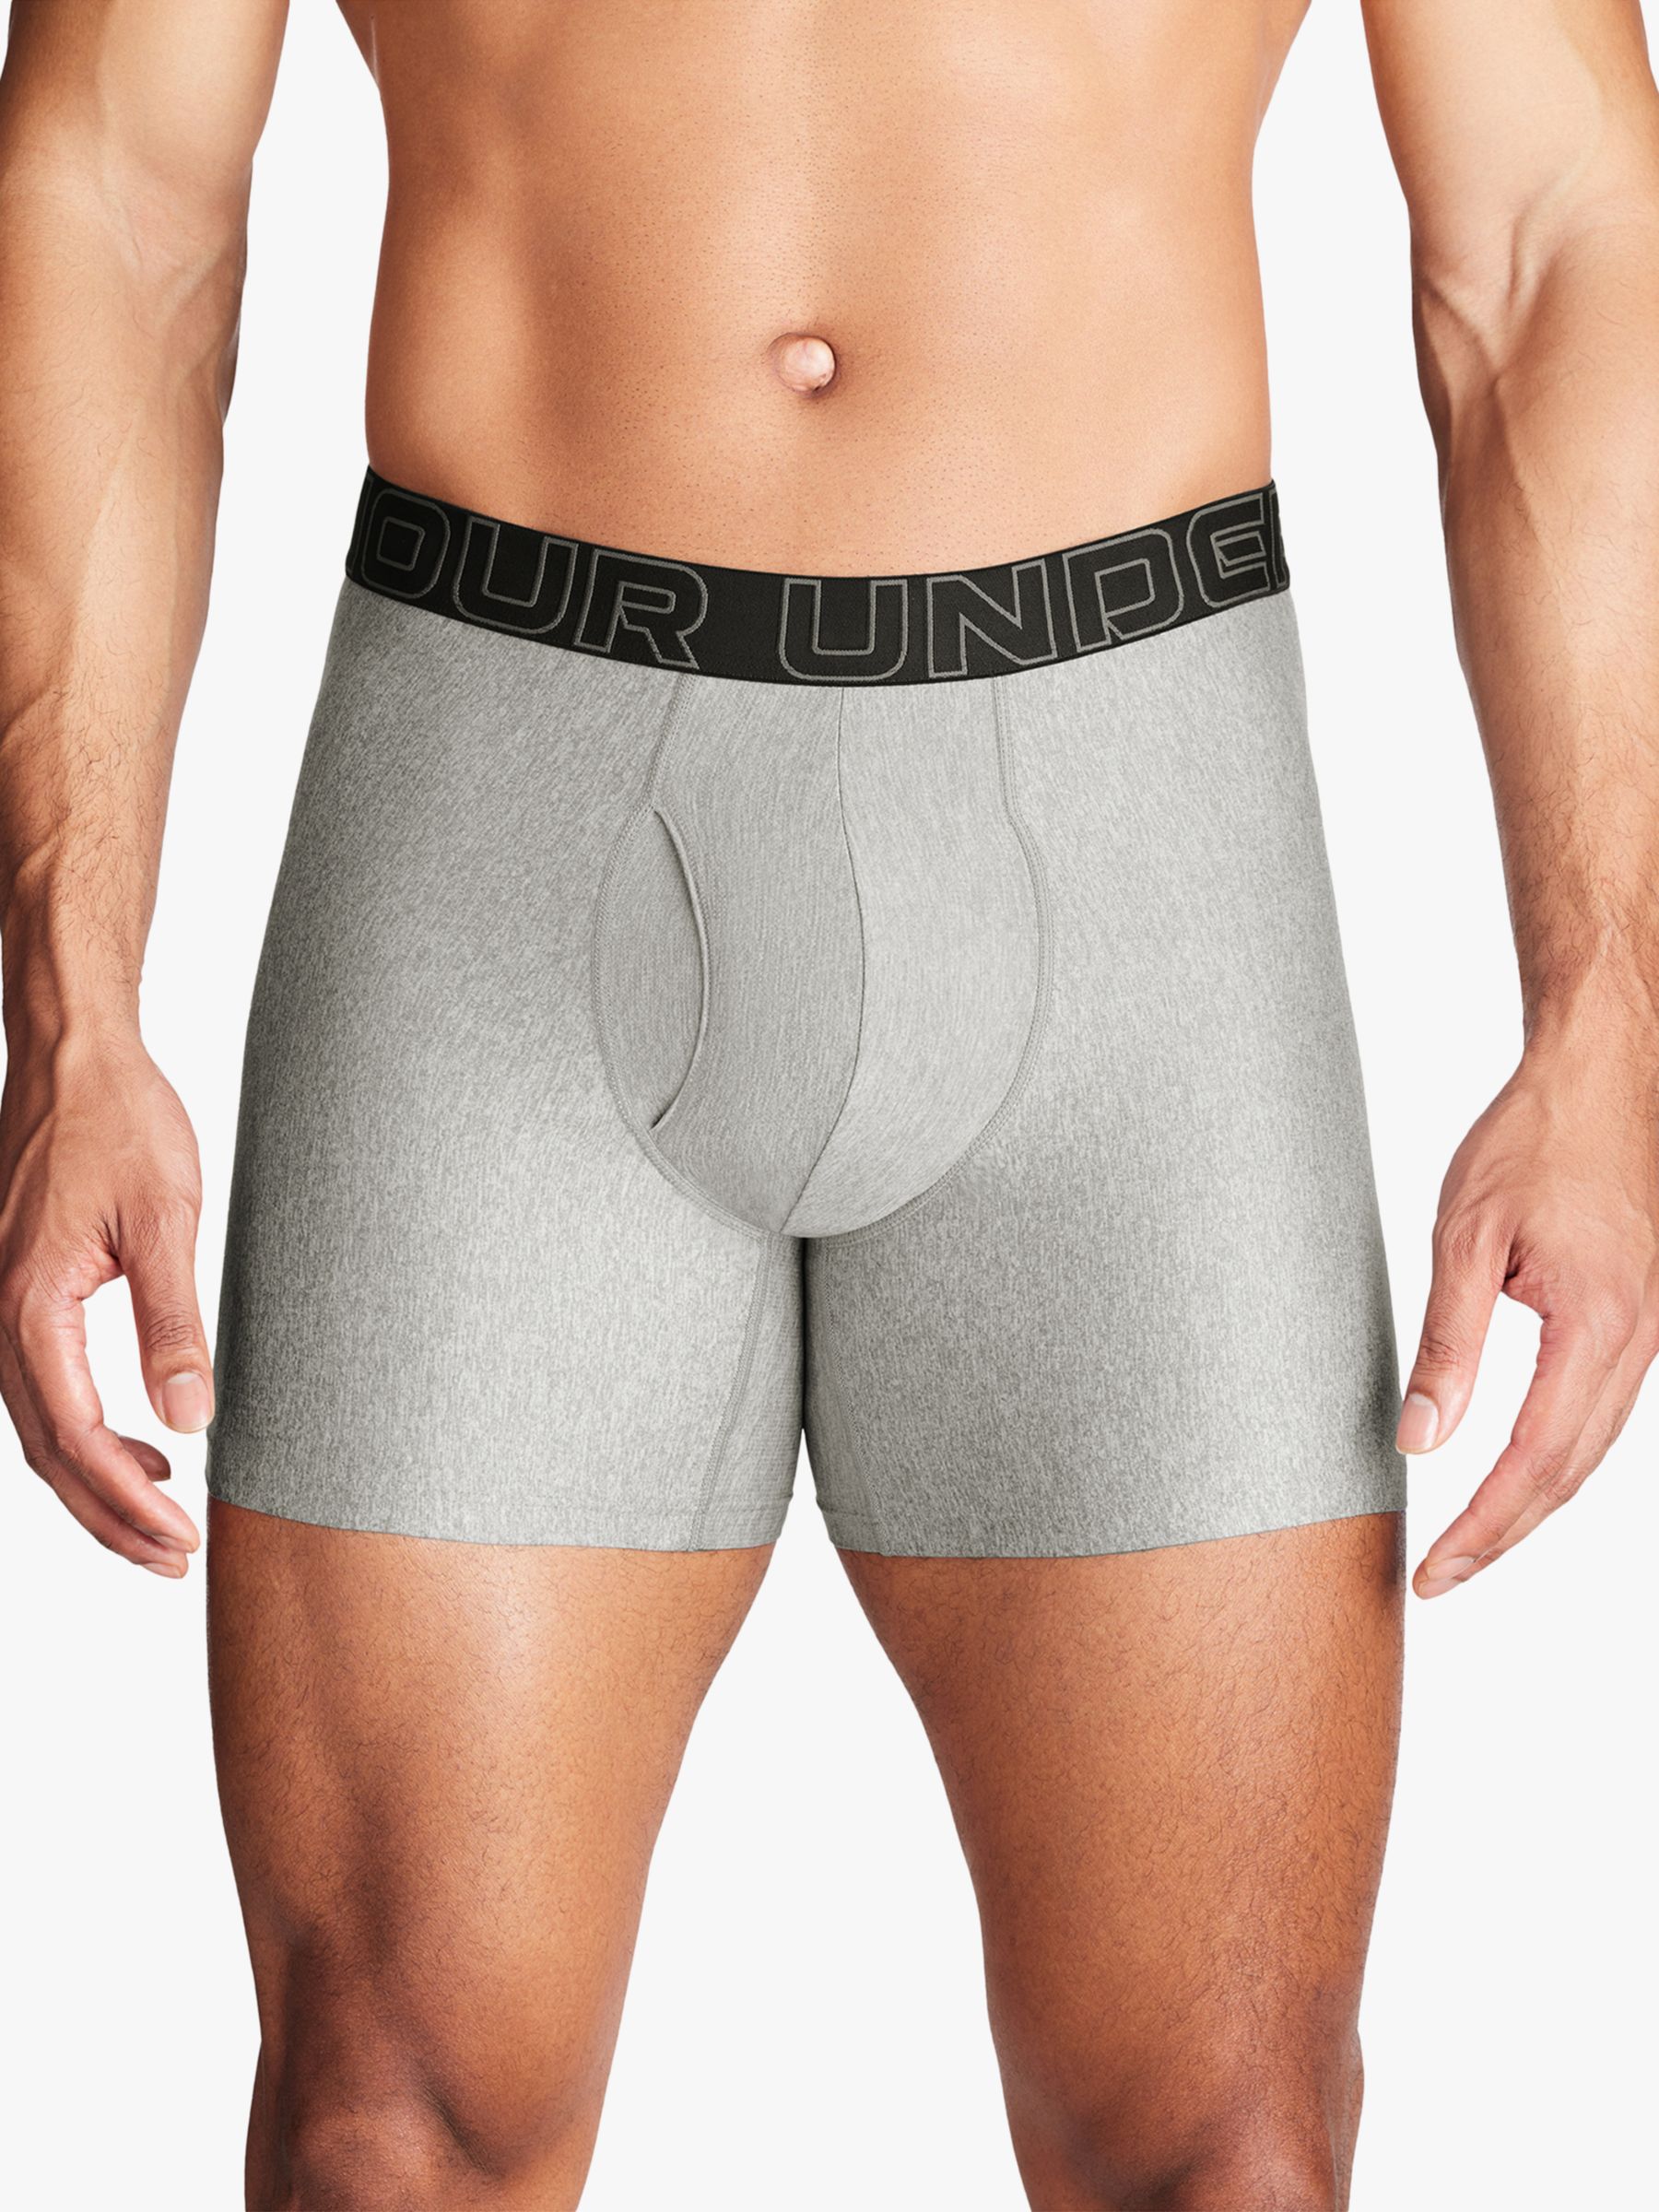 Under Armour Tech 6" Boxers, Pack of 3, Black/Grey/Charcoal, S